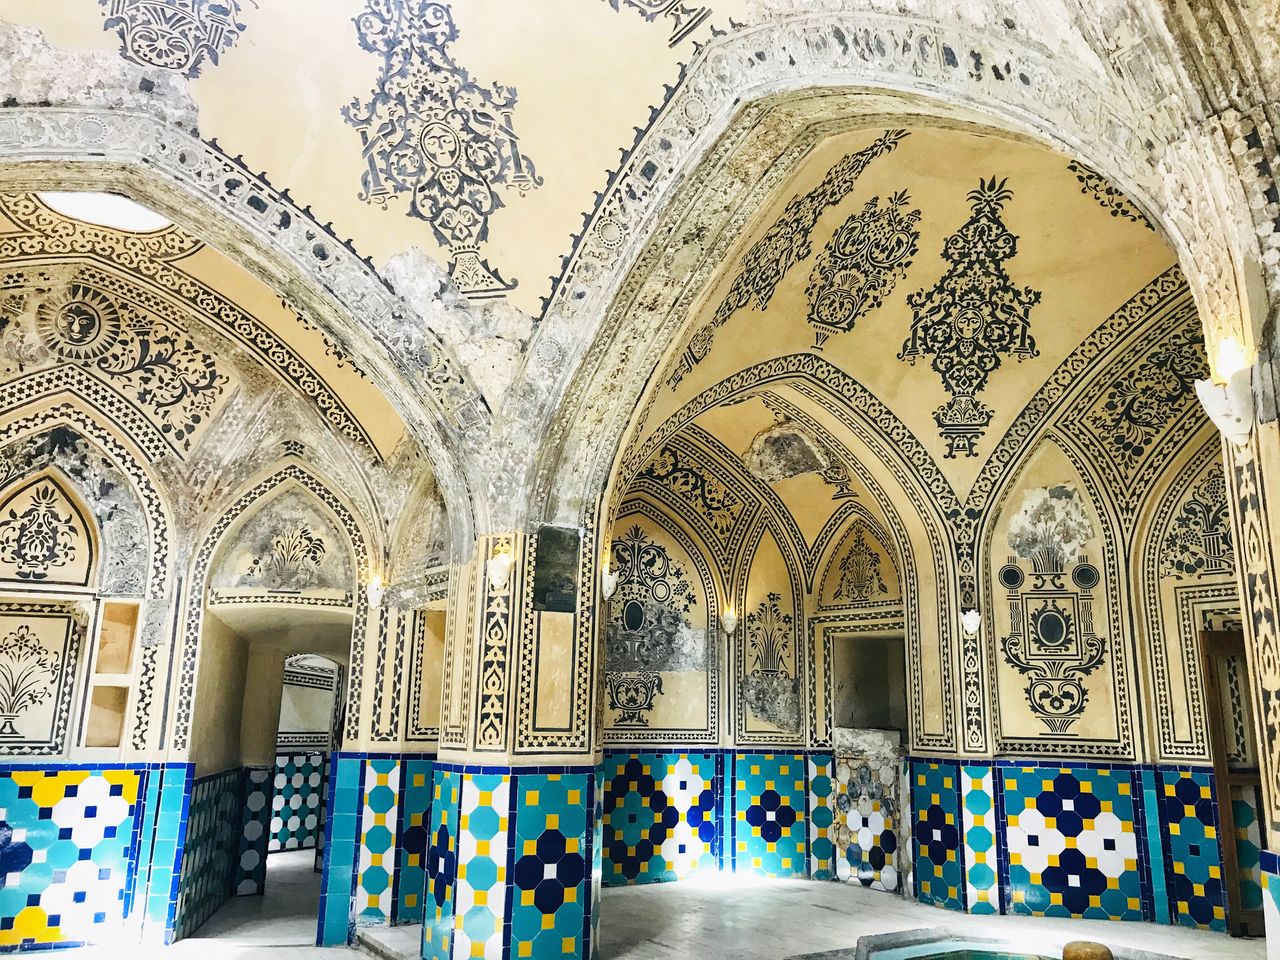 architecture, arch, built structure, indoors, building, ceiling, ornate, religion, pattern, art, travel destinations, belief, creativity, no people, spirituality, history, the past, place of worship, craft, flooring, mural, palace, multi colored, mosaic, decoration, painting